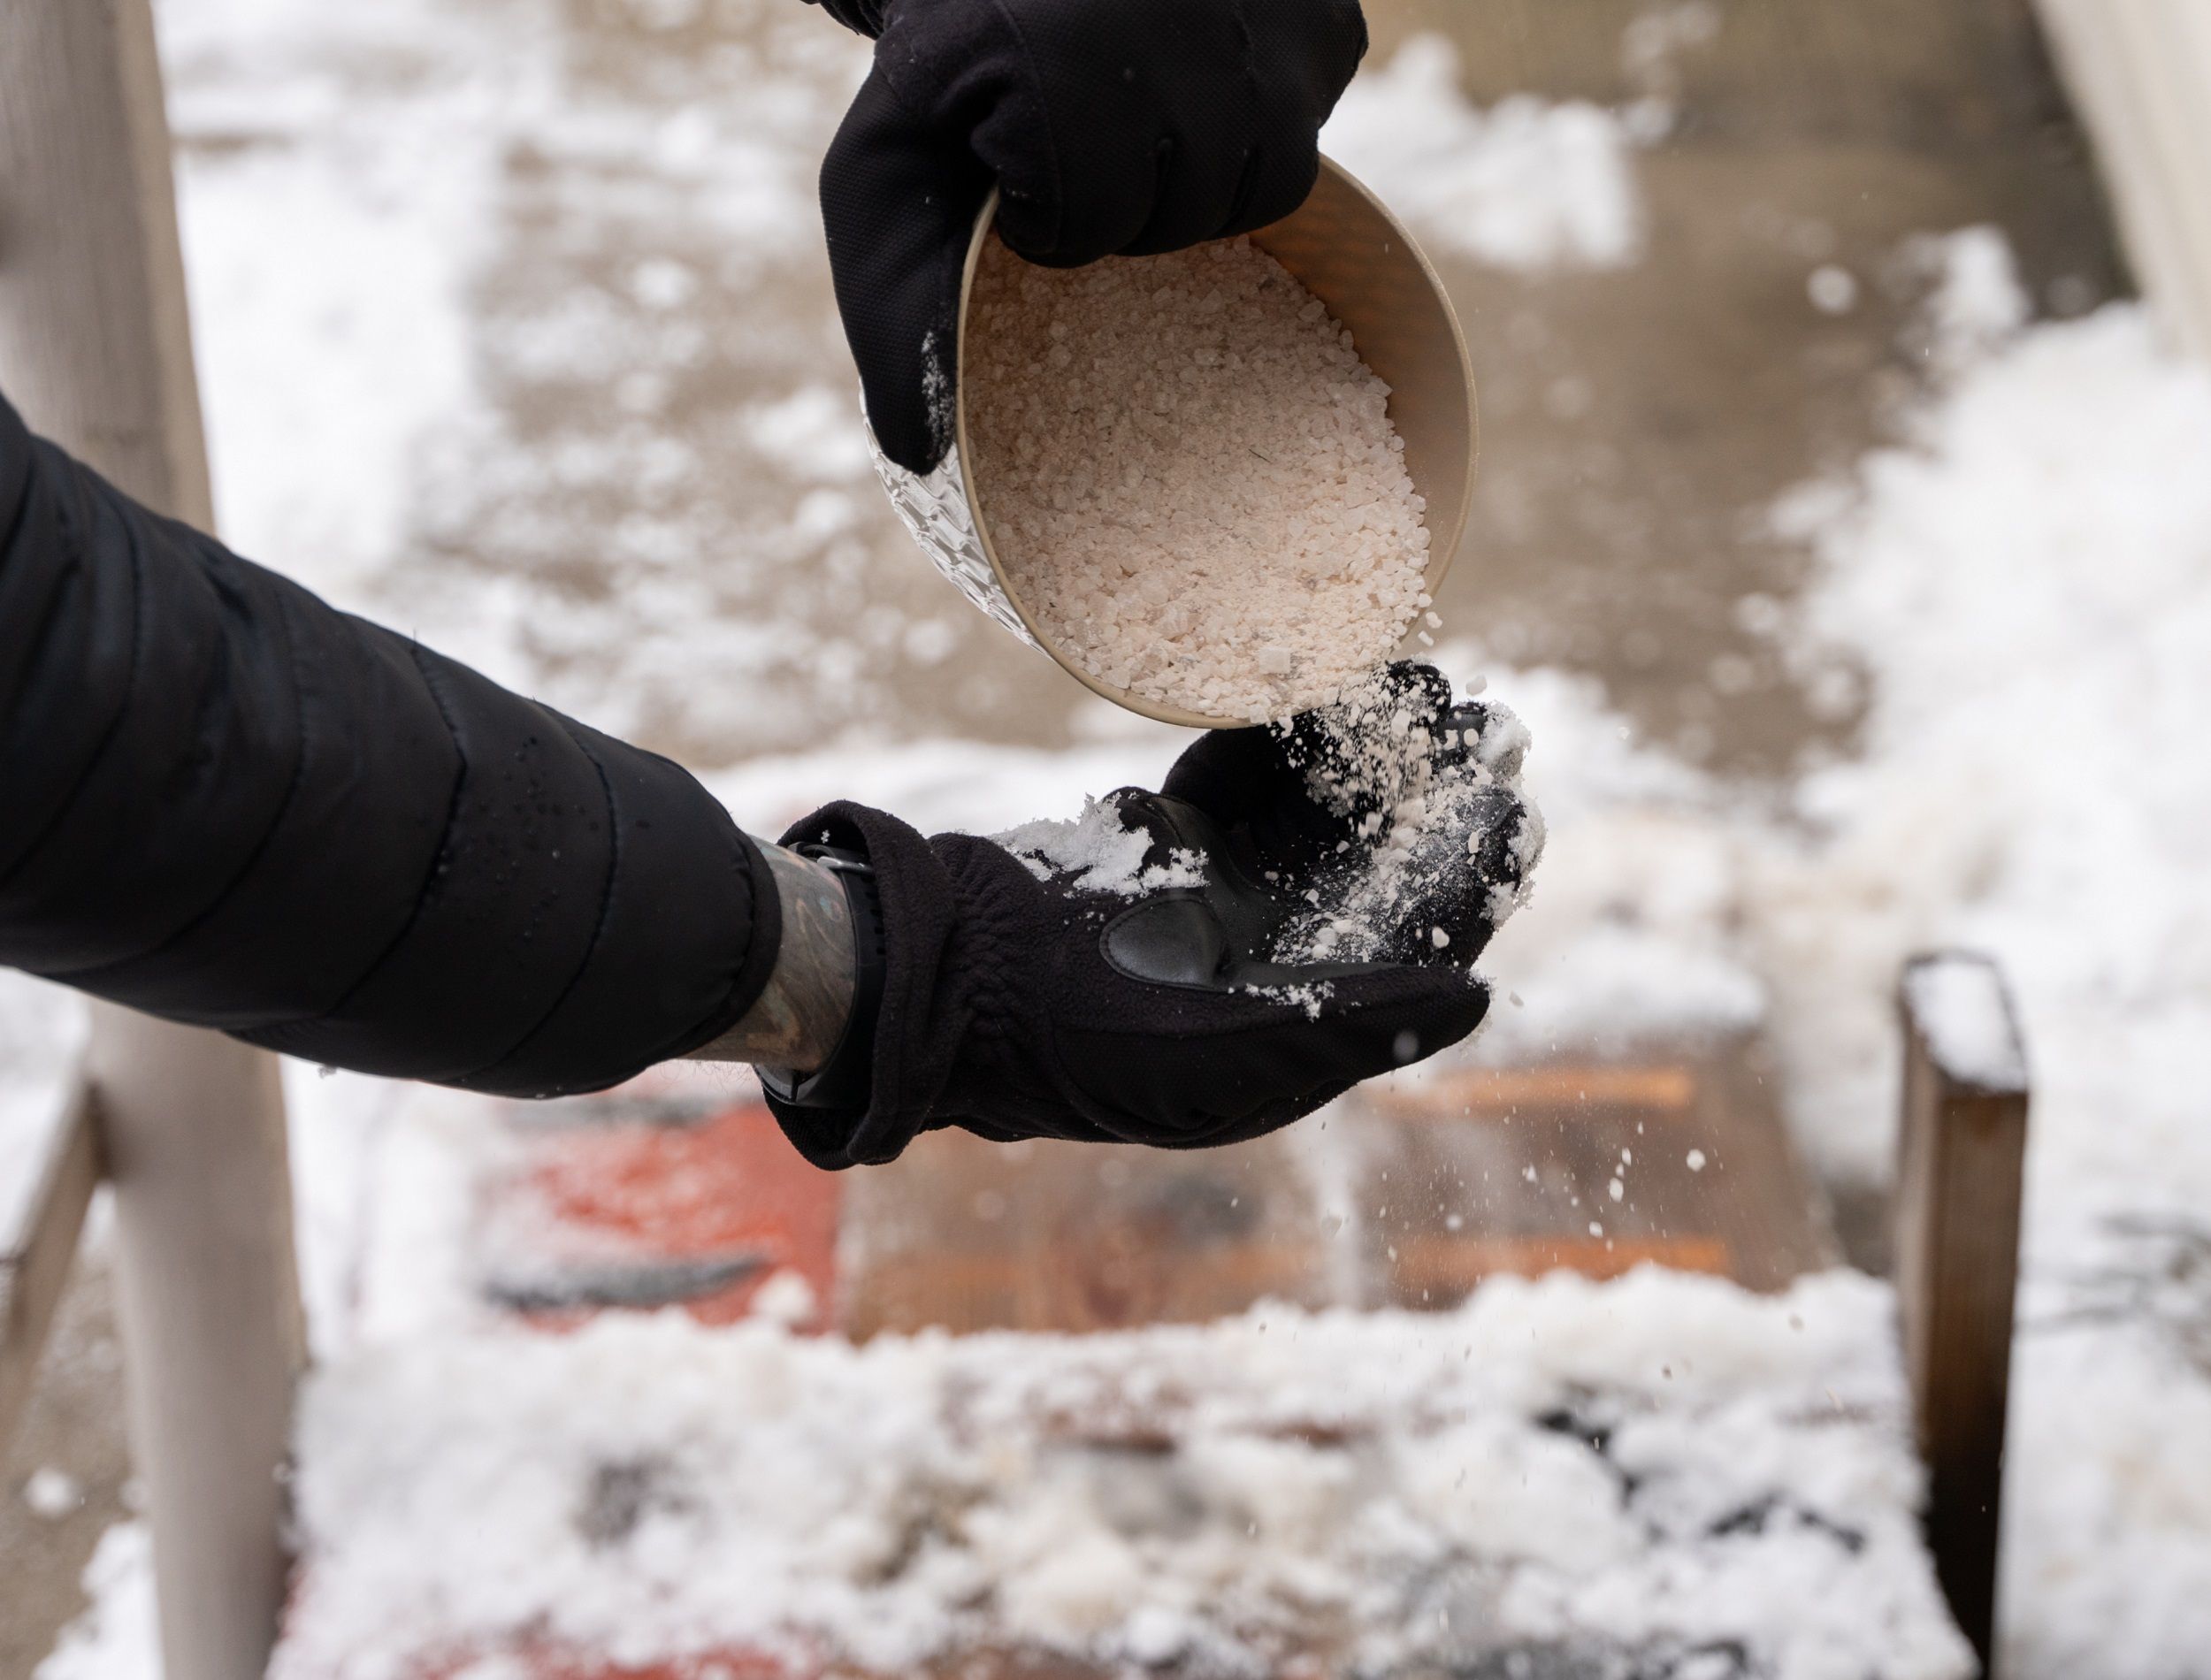 Pouring out Epsom salts to use on icy porch